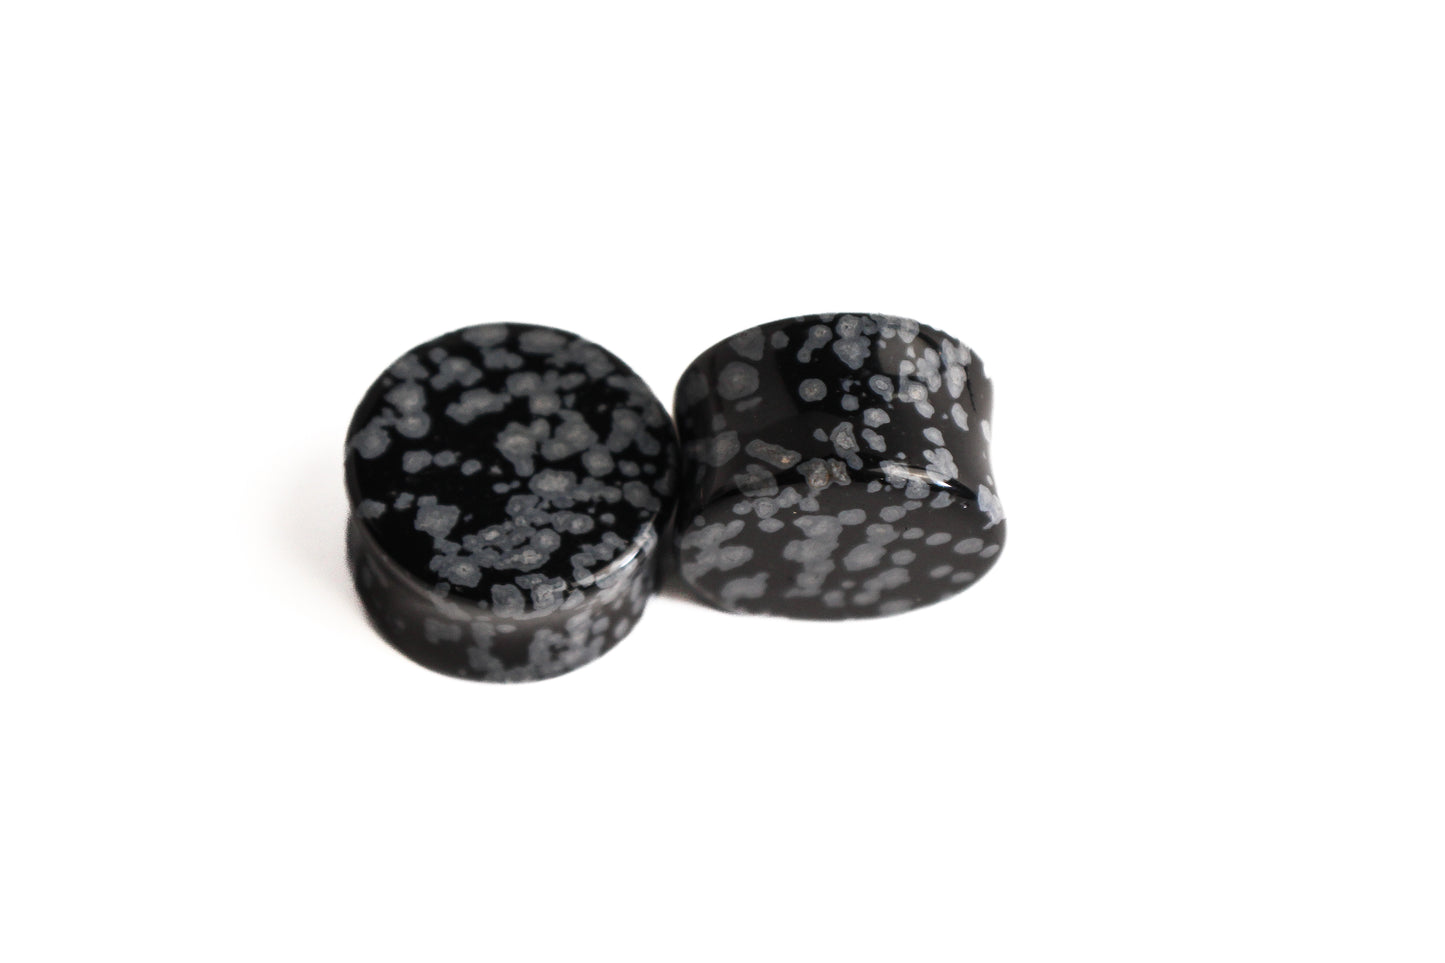 7/8" (22mm) - Snowflake Obsidian Double Flare Plugs